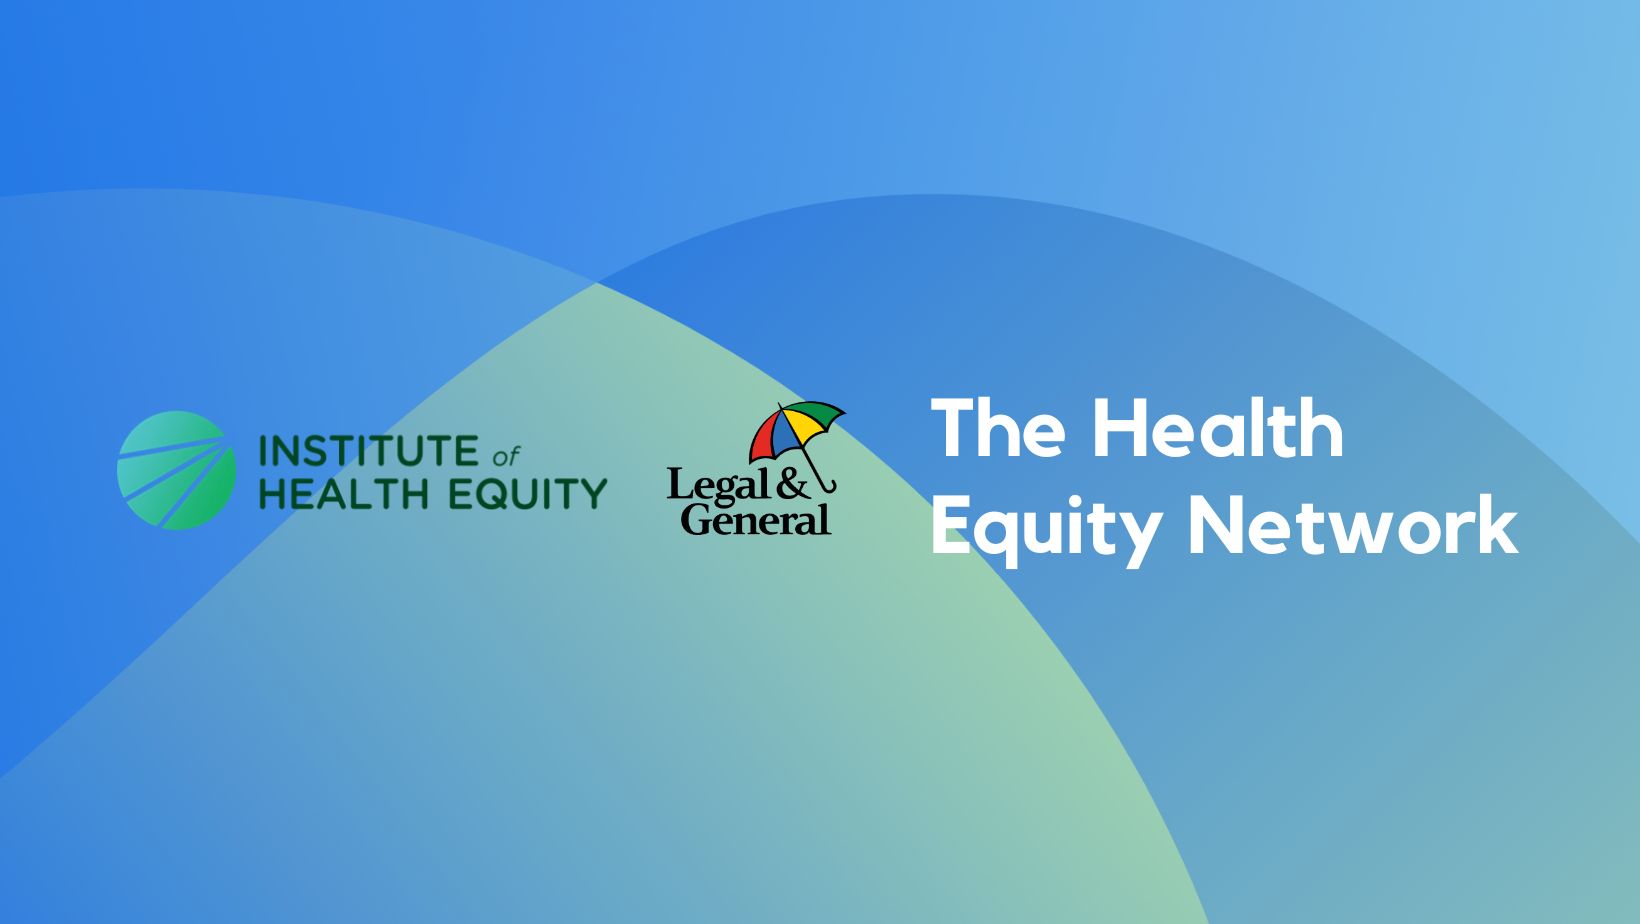 The Health Equity Network